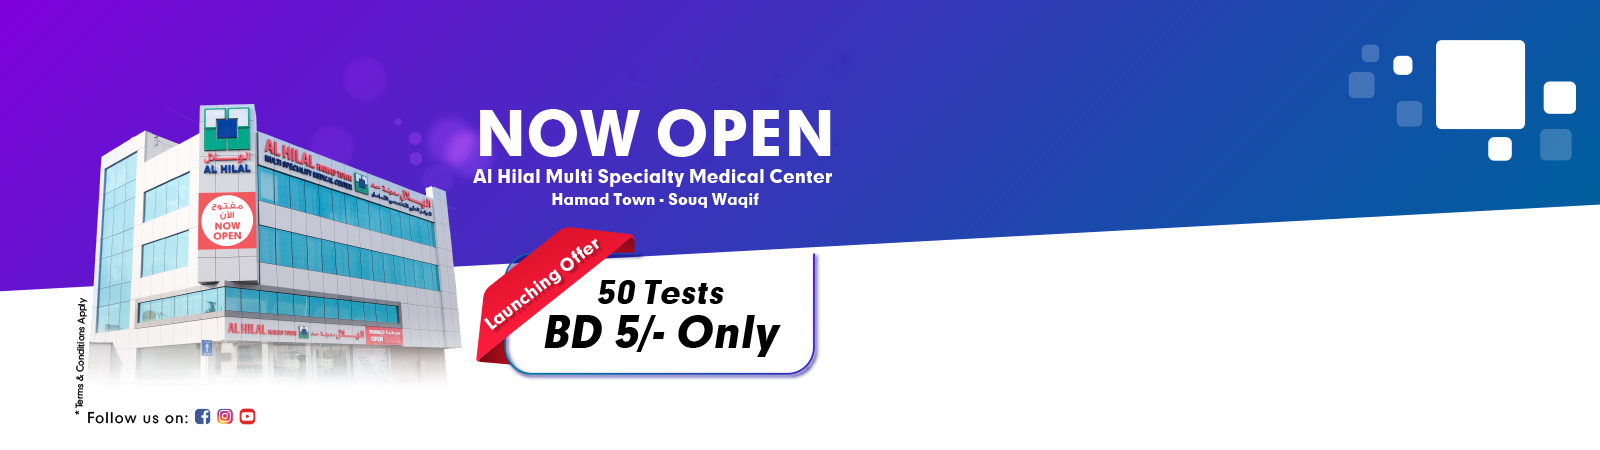 ALH-Website-Banner-ALH-HT-Launching-Offer-50-Tests-1600-x-450